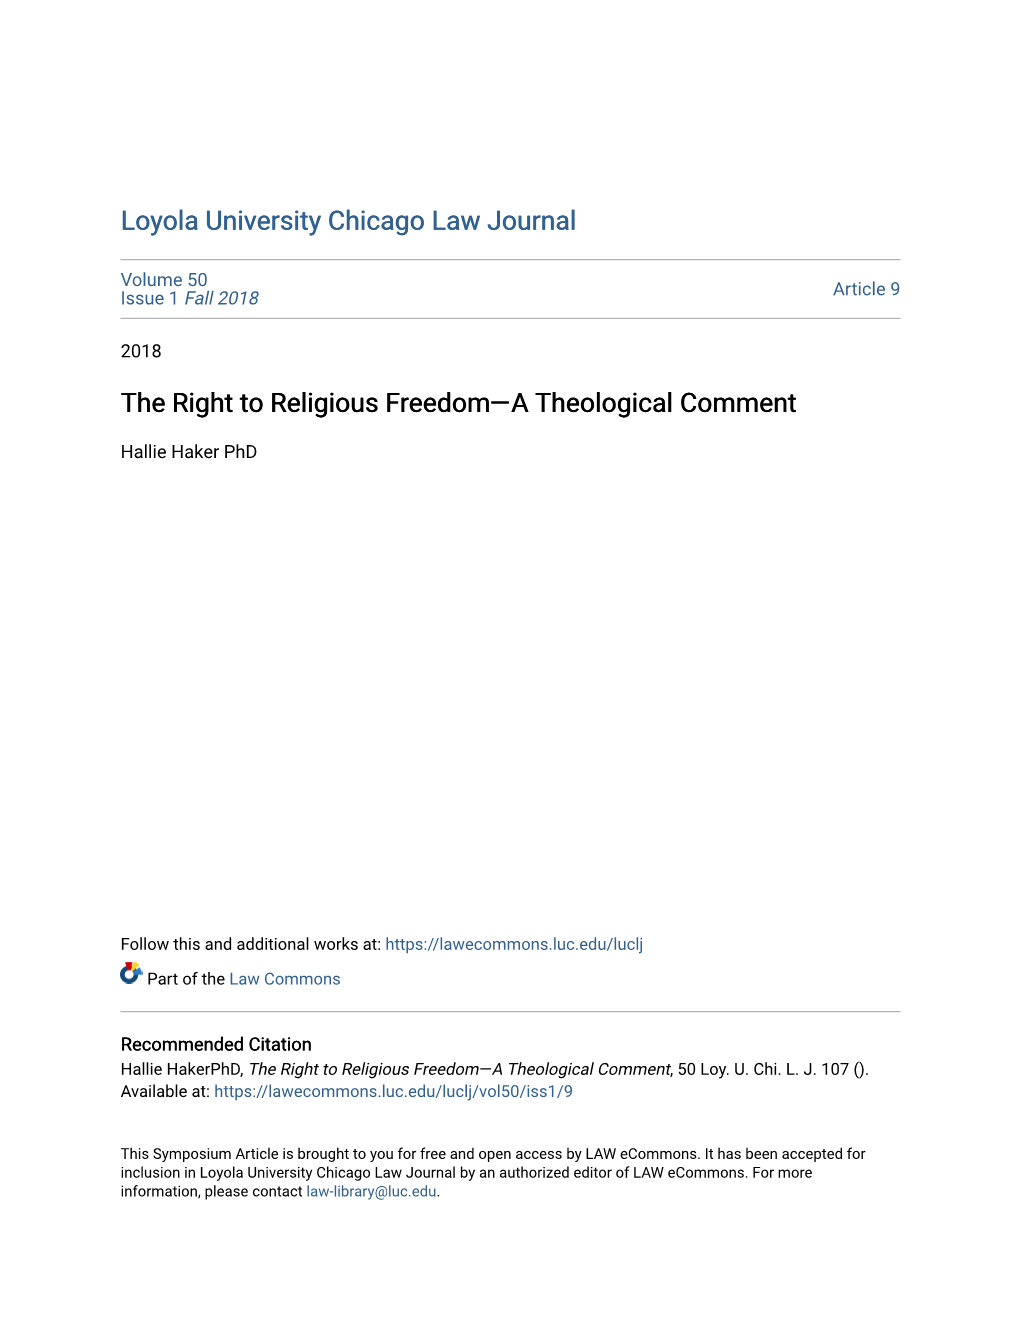 The Right to Religious Freedom—A Theological Comment